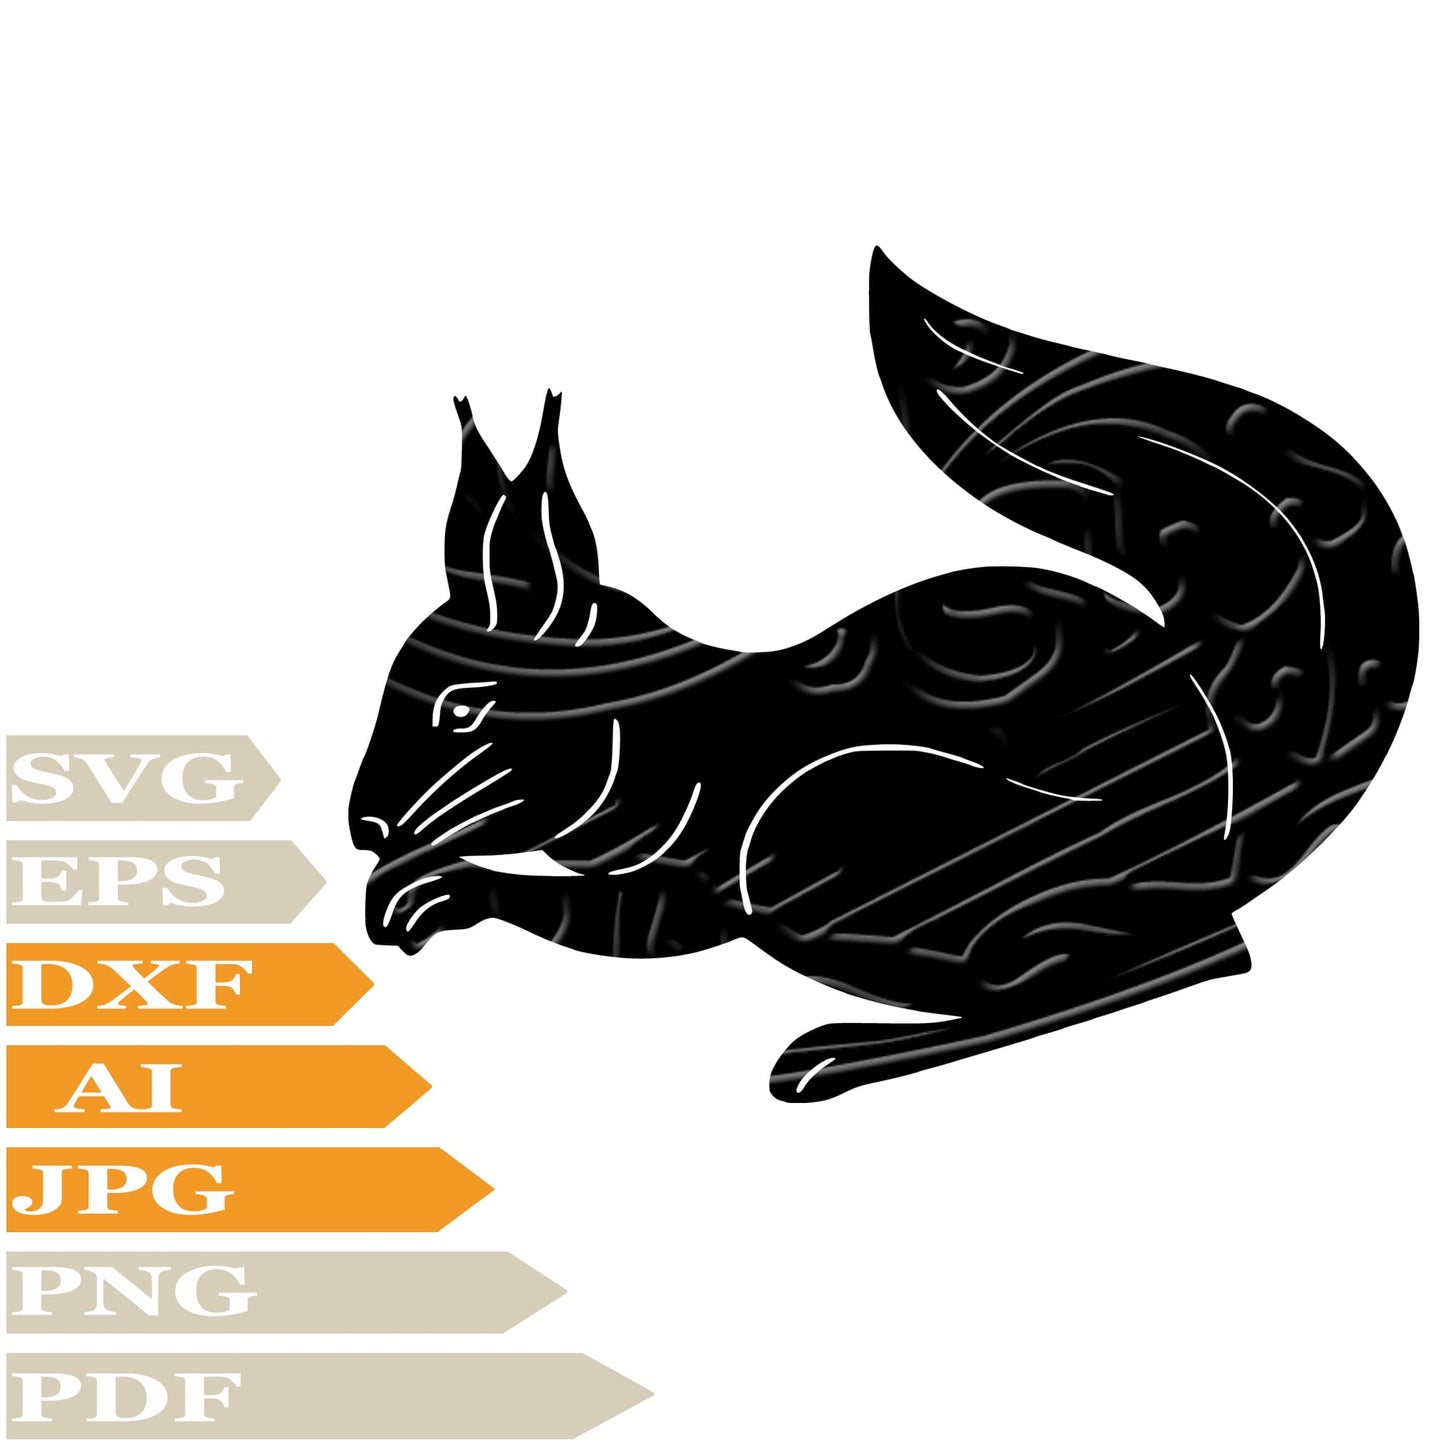 Squirrel, Funny Squirrel Svg File, Image Cut, Png, For Tattoo, Silhouette, Digital Vector Download, Cut File, Clipart, For Cricut